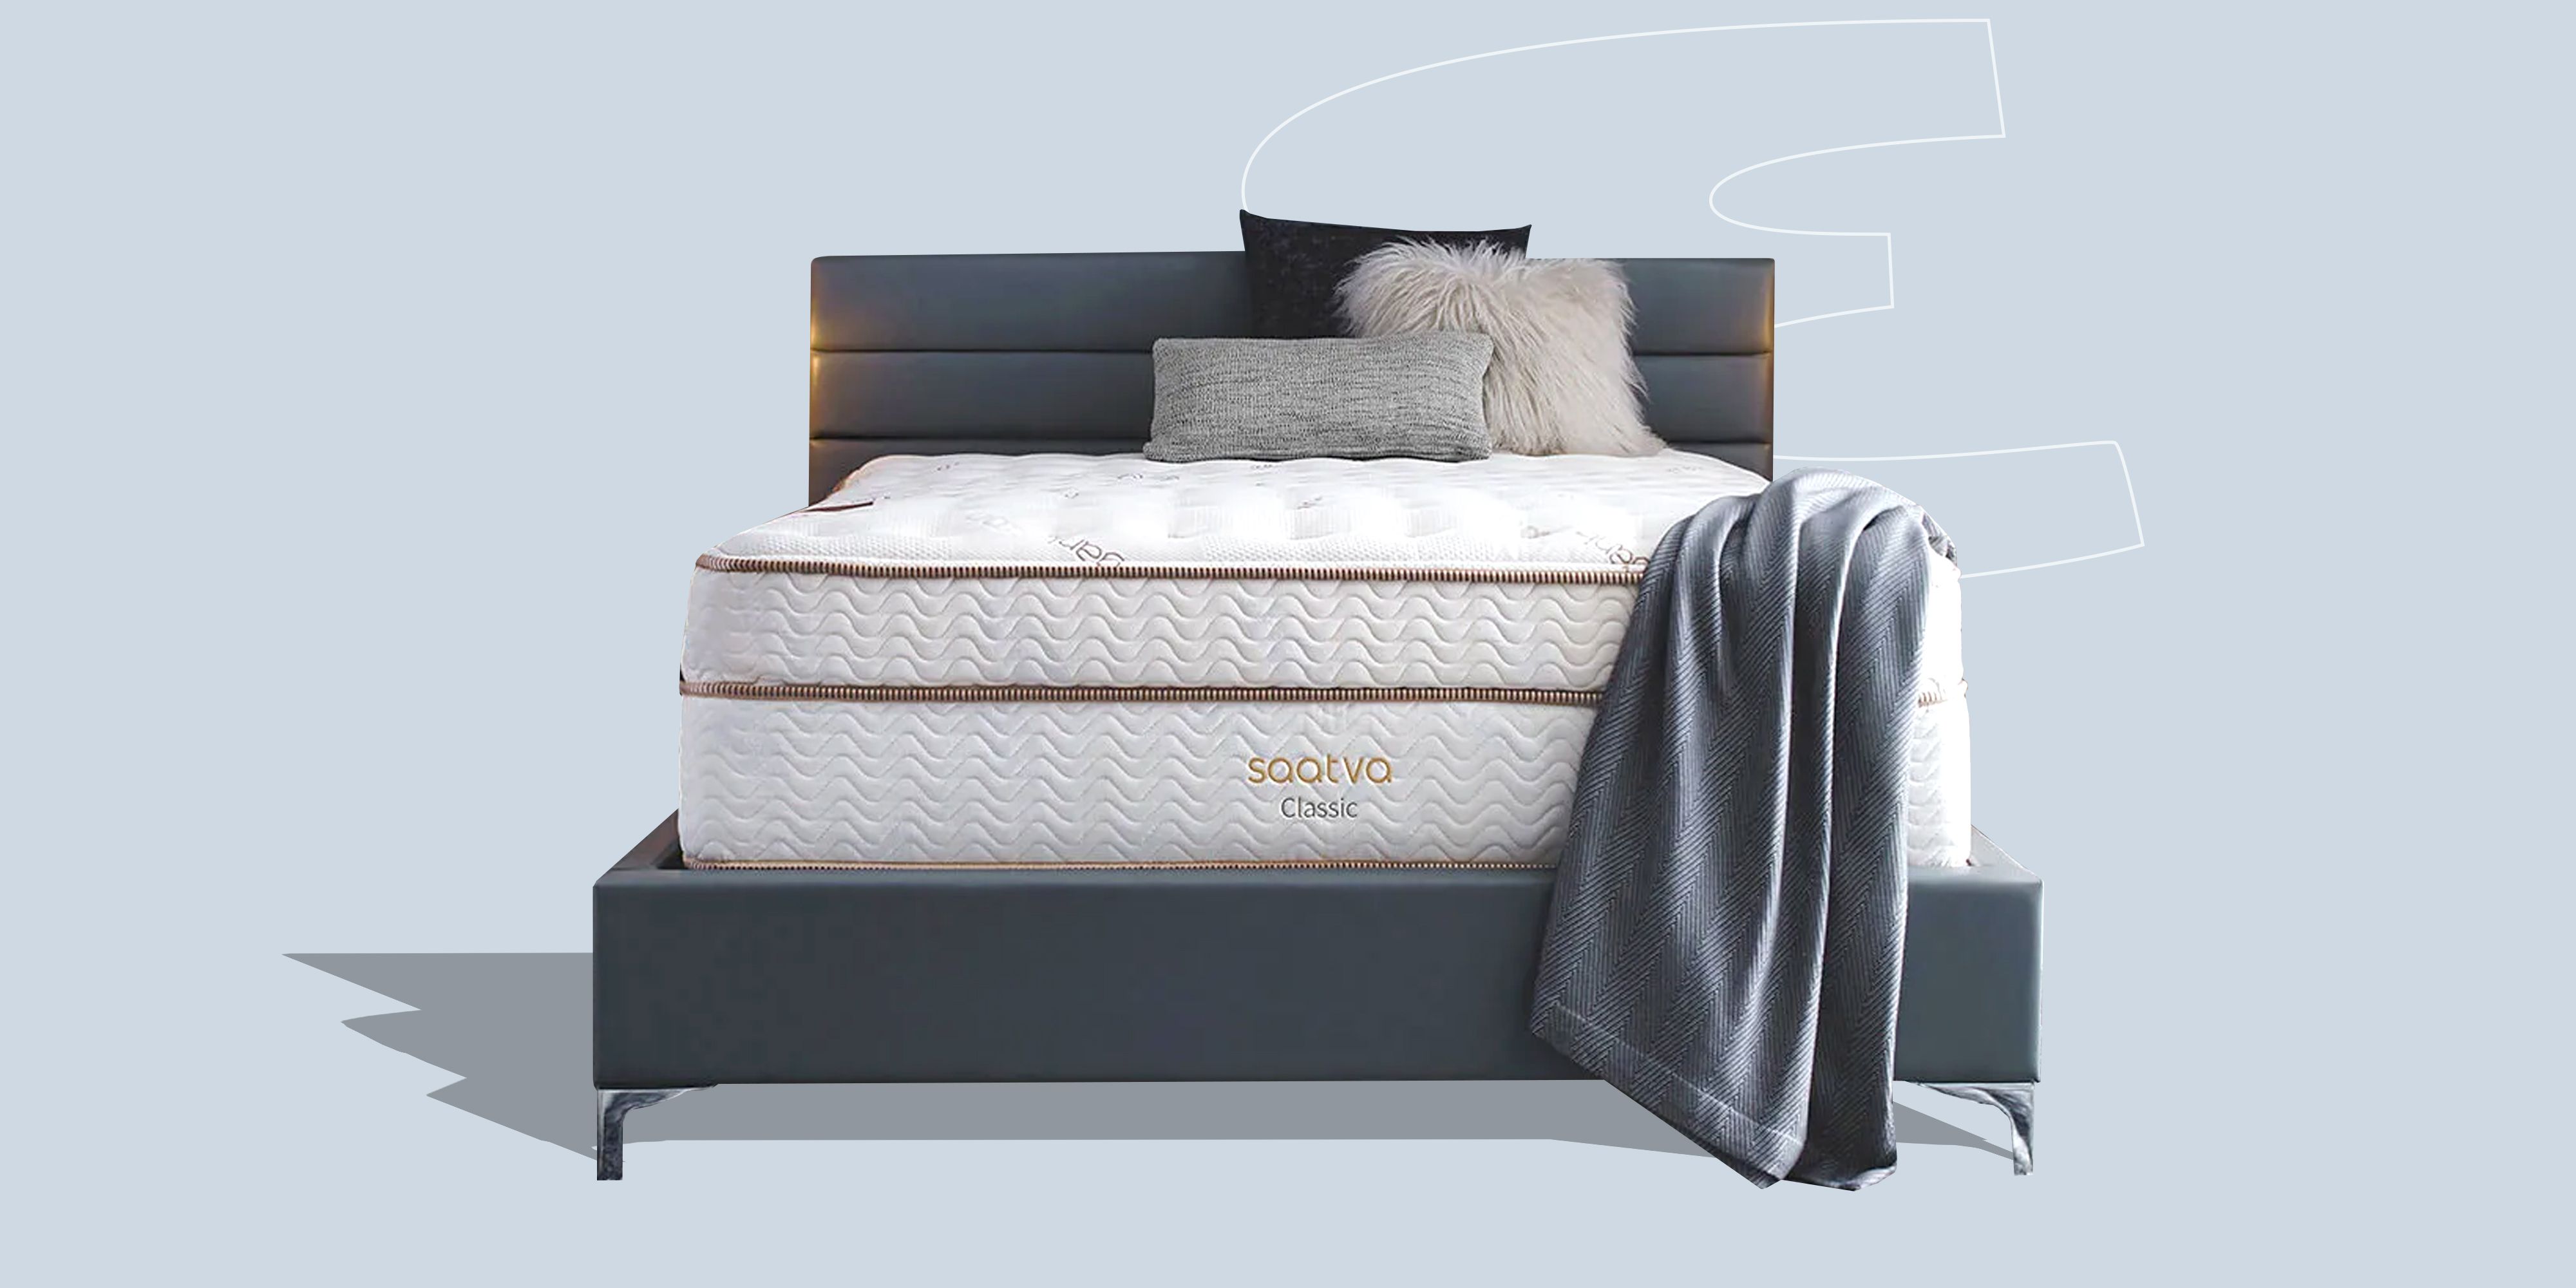 Floyd Bed Review: What to Know Before You Buy